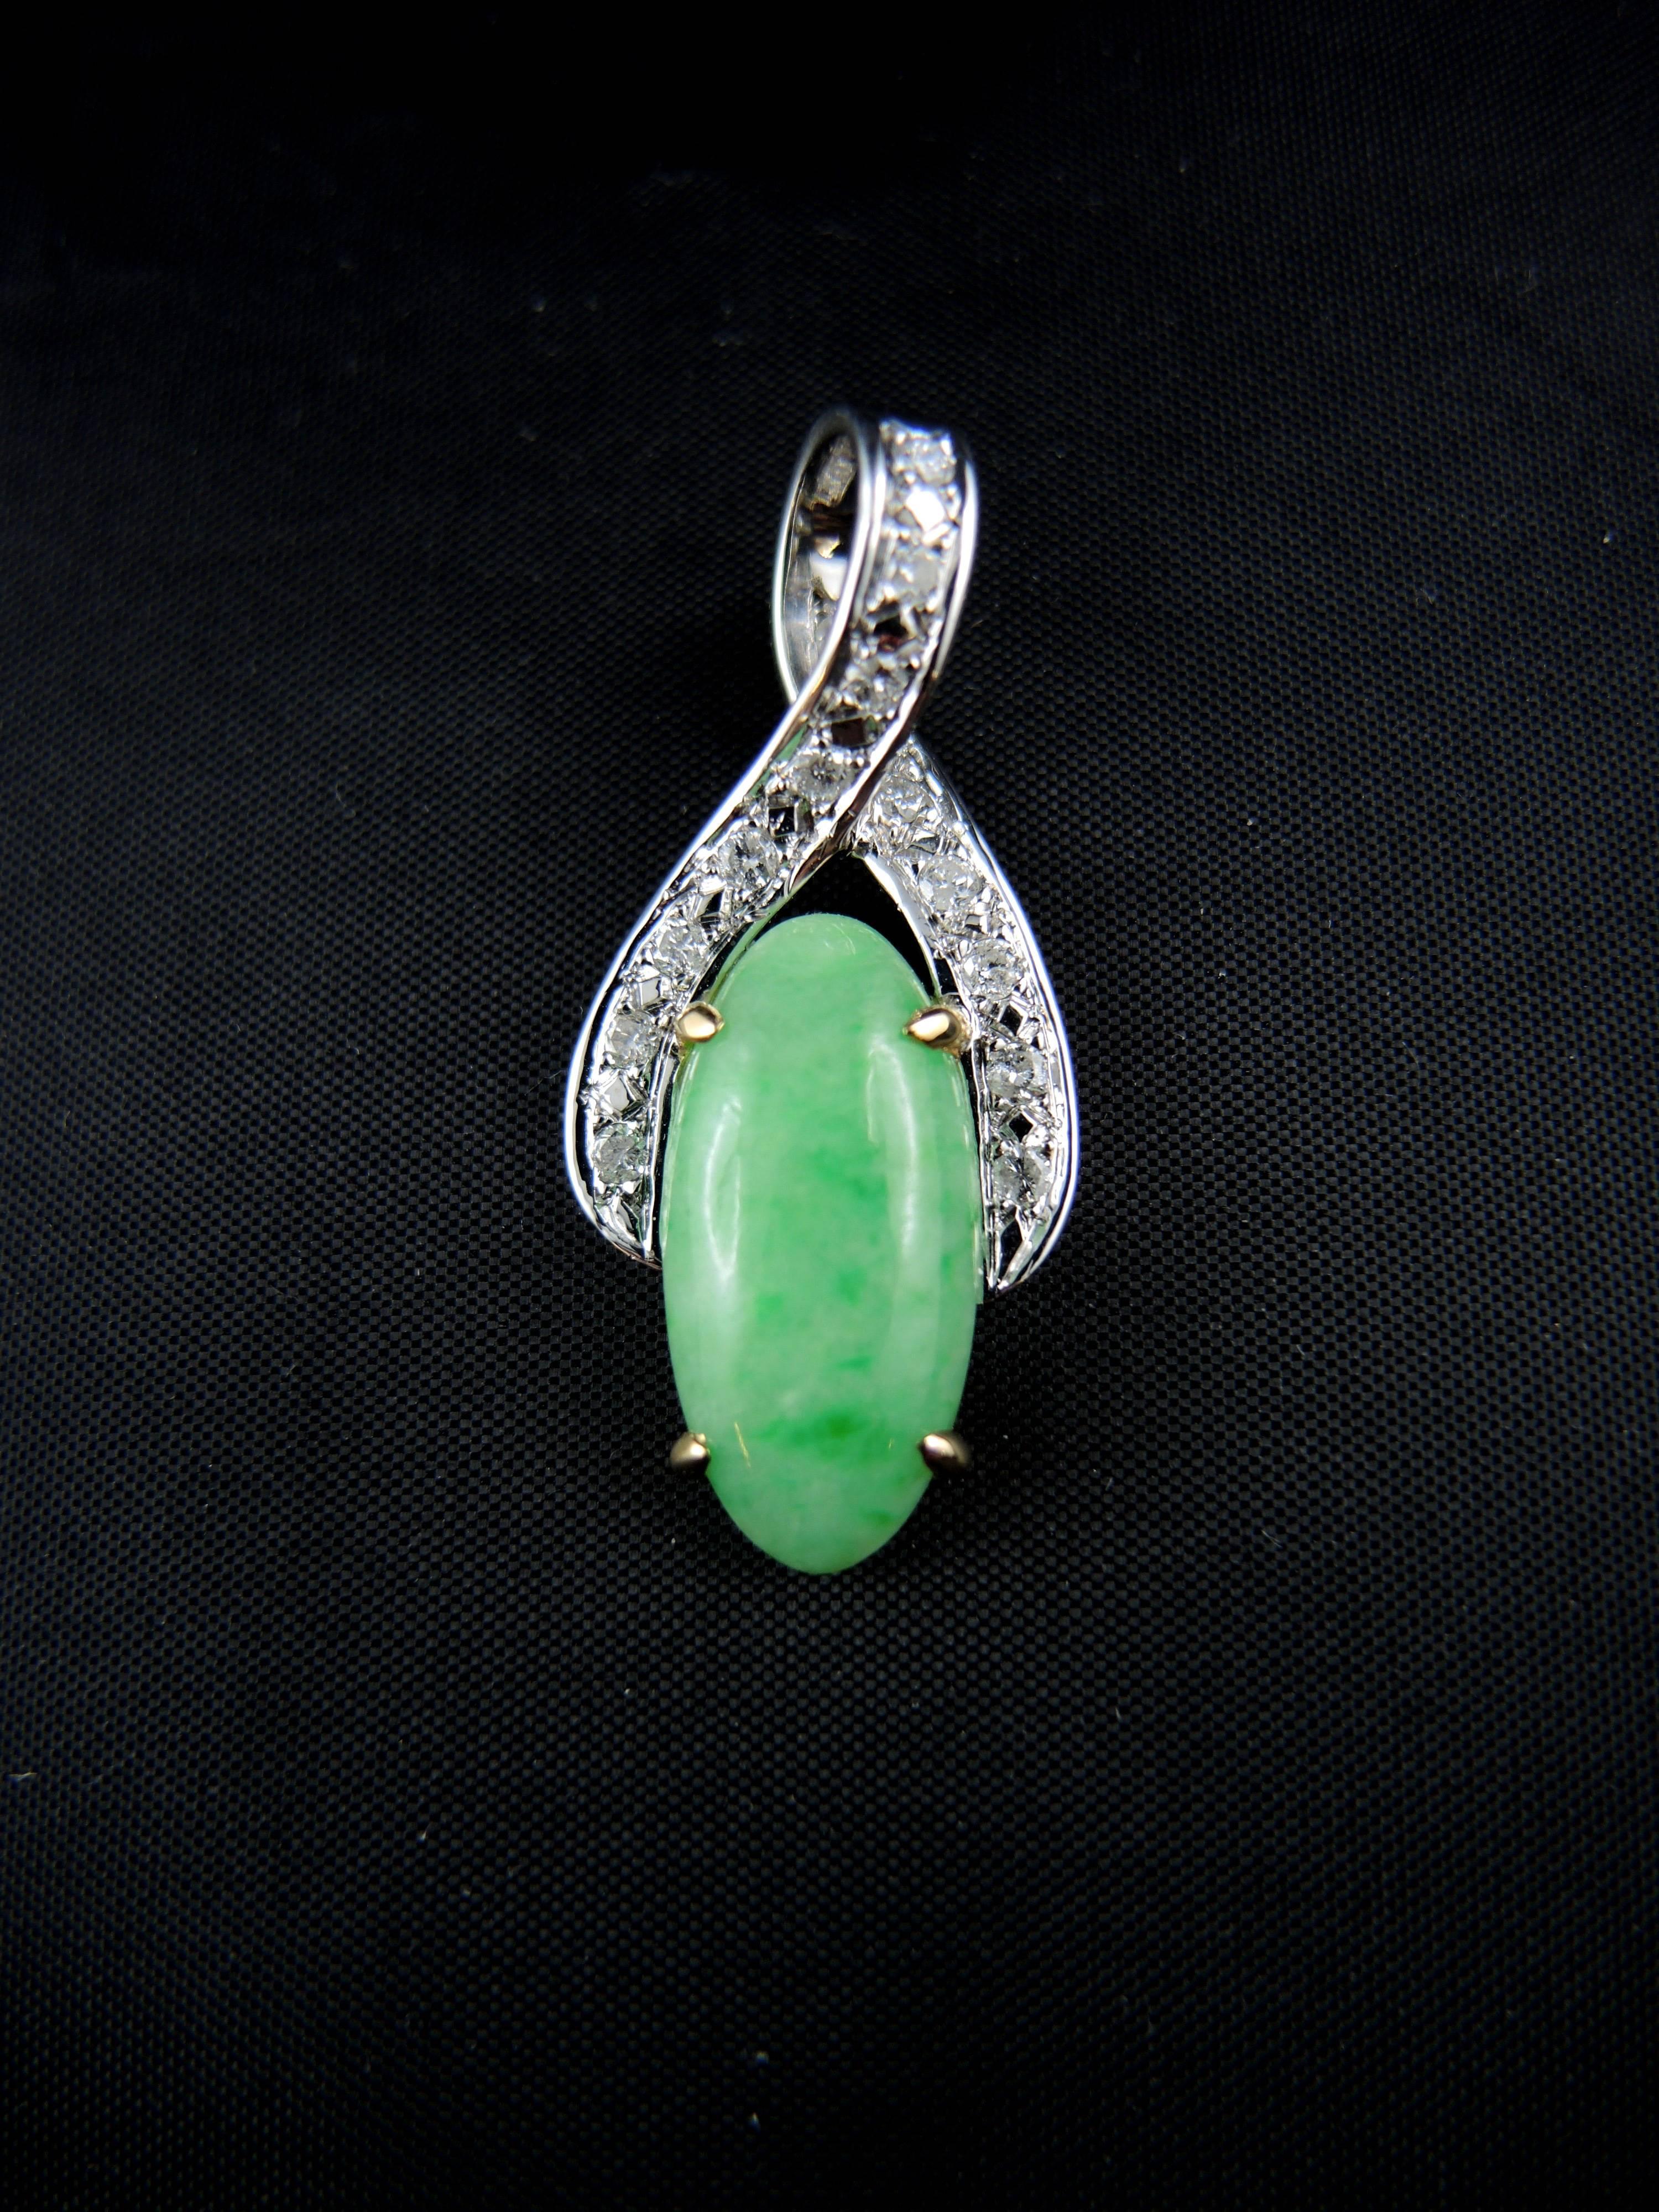 18 kt white and yellow gold pendant (quality mark: head of eagle), set with a stunning  oval cut jadeite jade, weight apx 5,00 Cts, surrounded with round brilliant cut diamonds (total weight apx 0,75 ct).